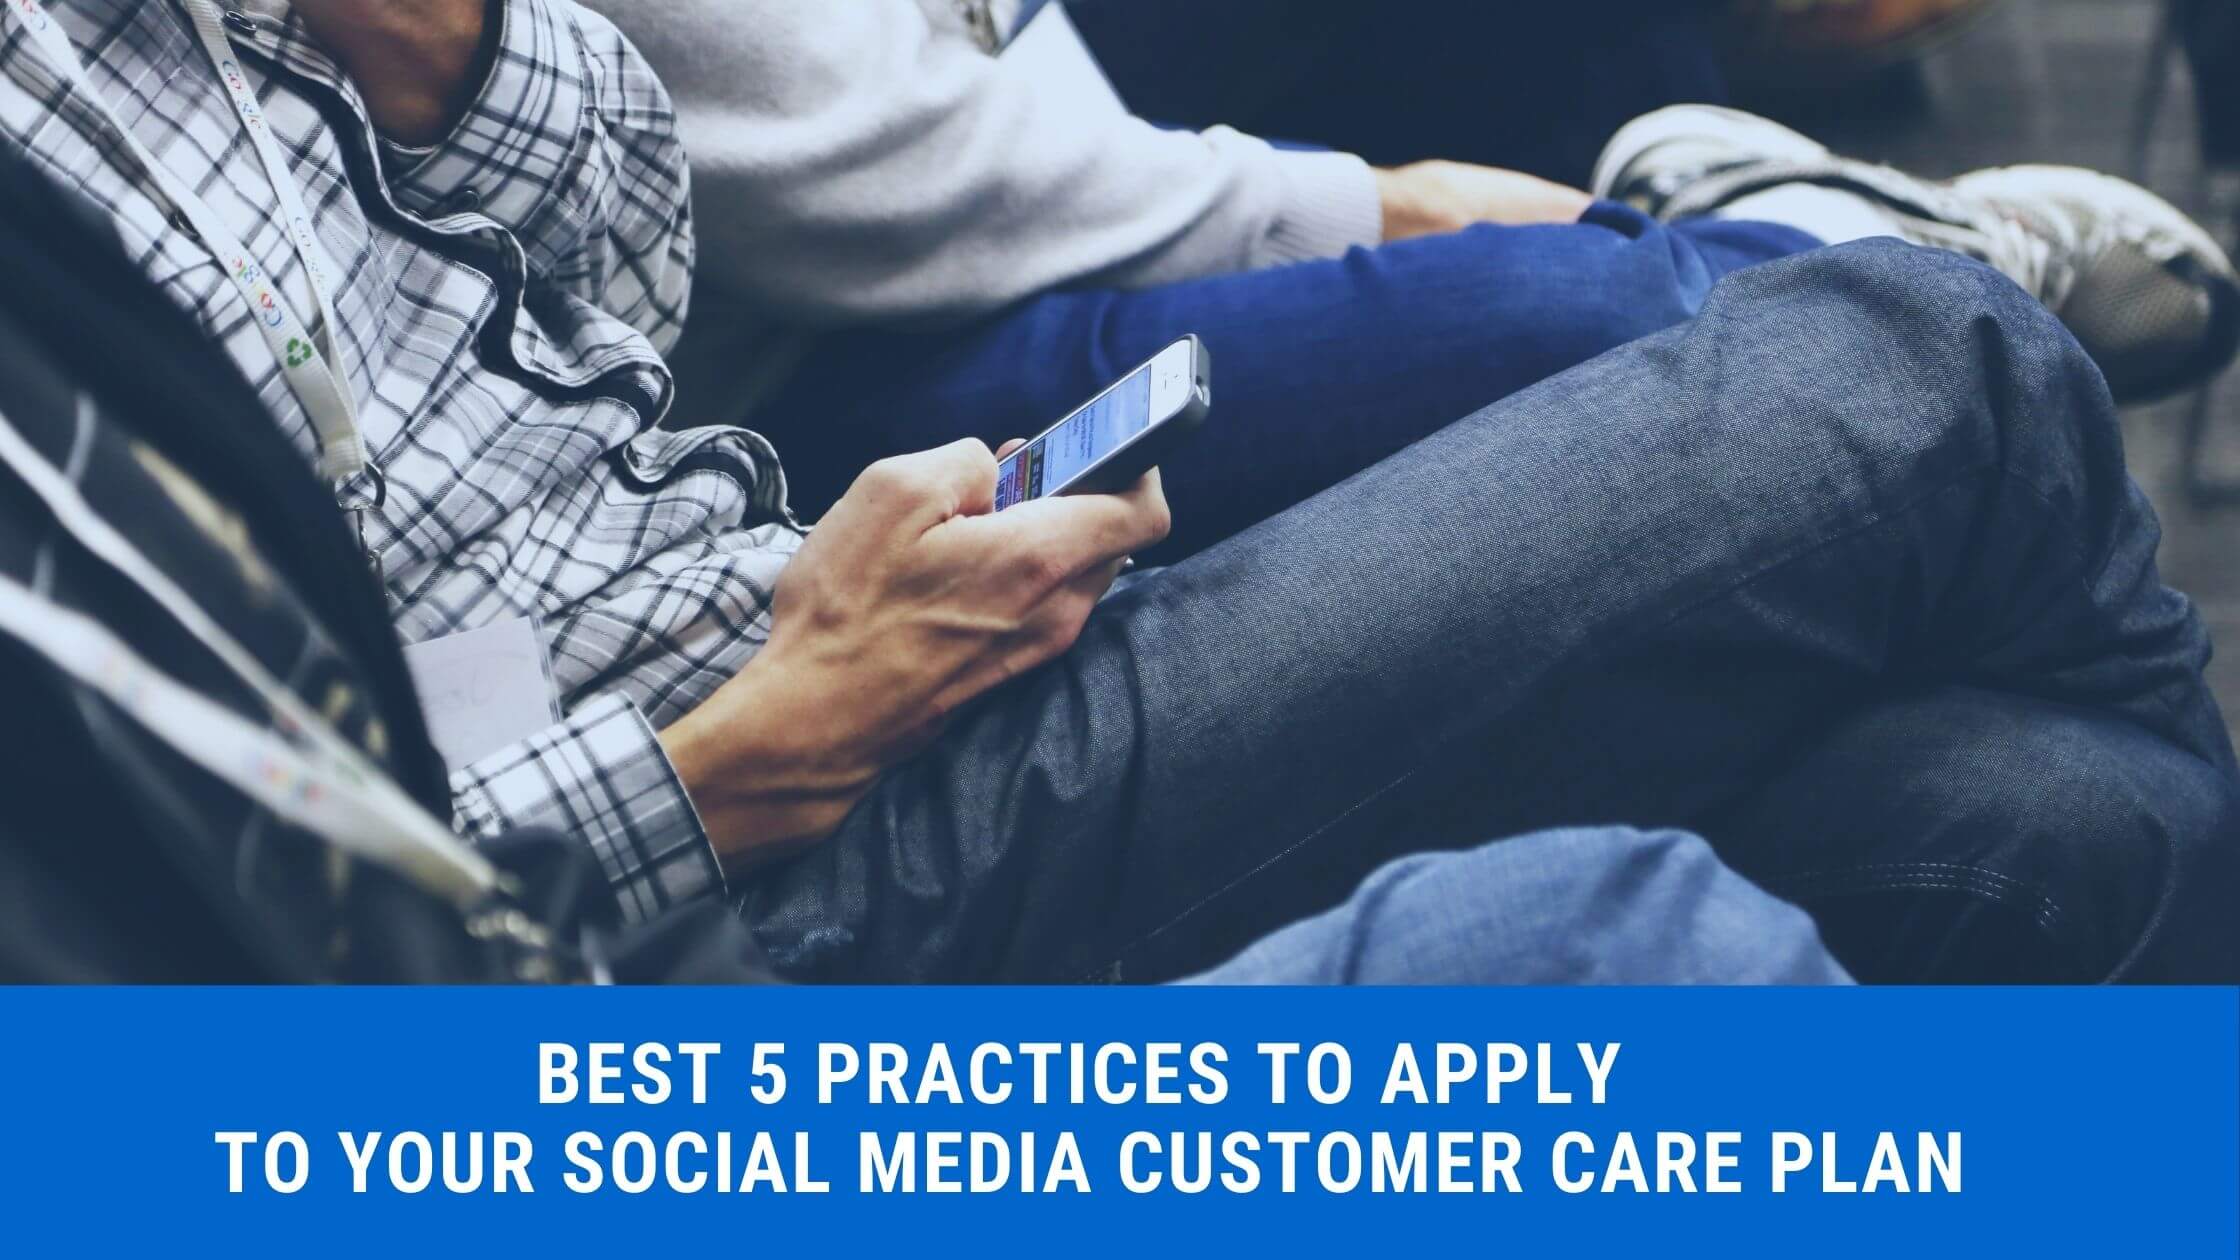 Best 5 Practices to Apply to Your Social Media Customer Care Plan